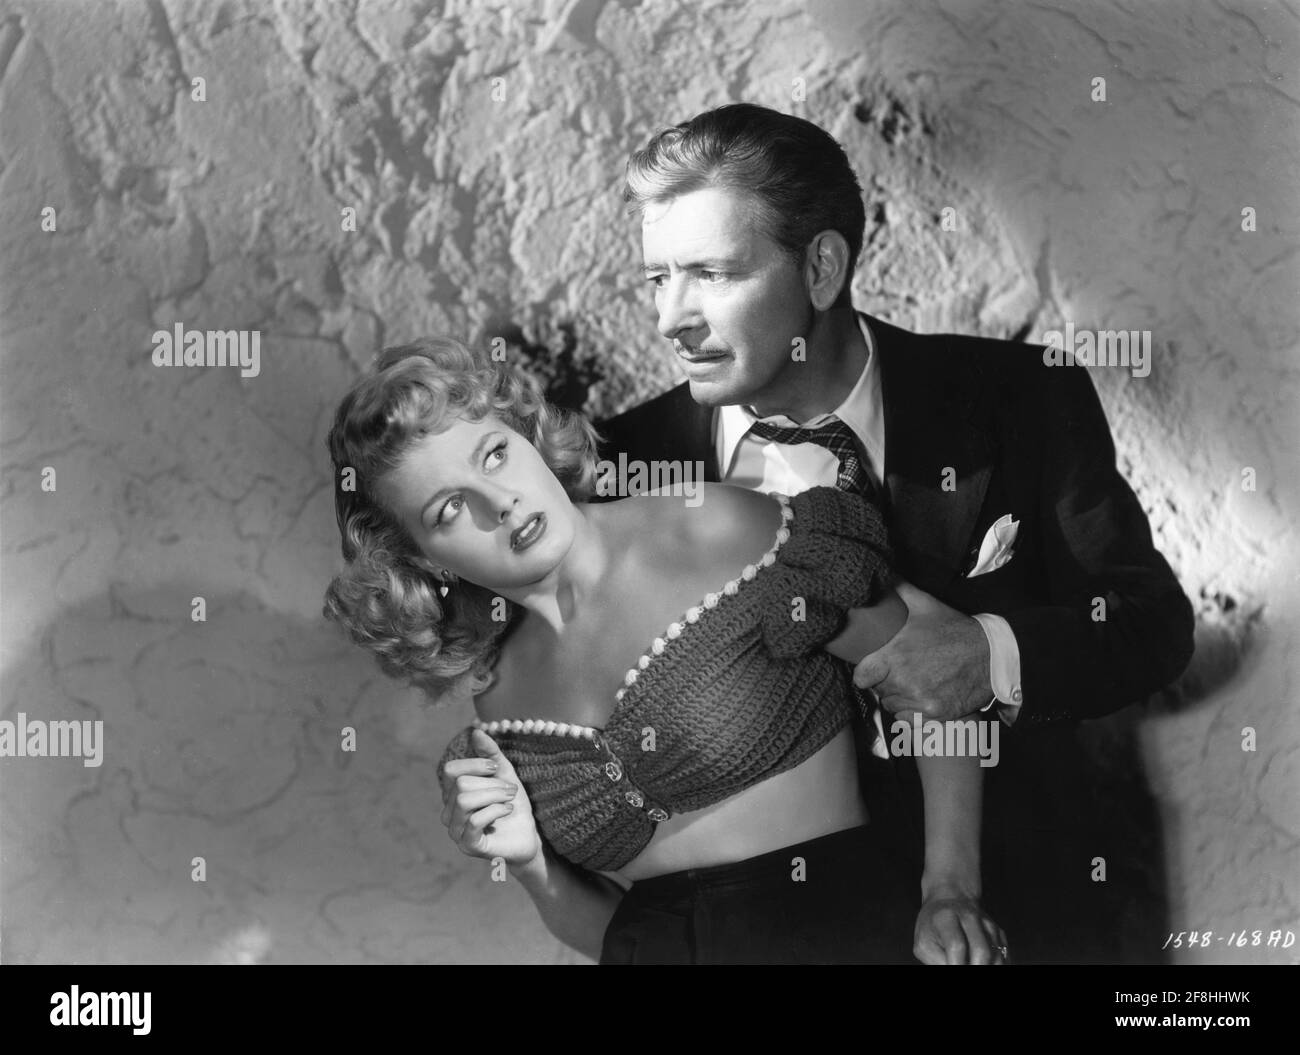 SHELLEY WINTERS and ROBNALD COLMAN Posed Publicity Portrait for A DOUBLE LIFE 1947 director GEORGE CUKOR writers Ruth Gordon and Garson Kanin  music Miklos Rozsa producer Michael Kanin  Kanin Productions / Universal Pictures Stock Photo